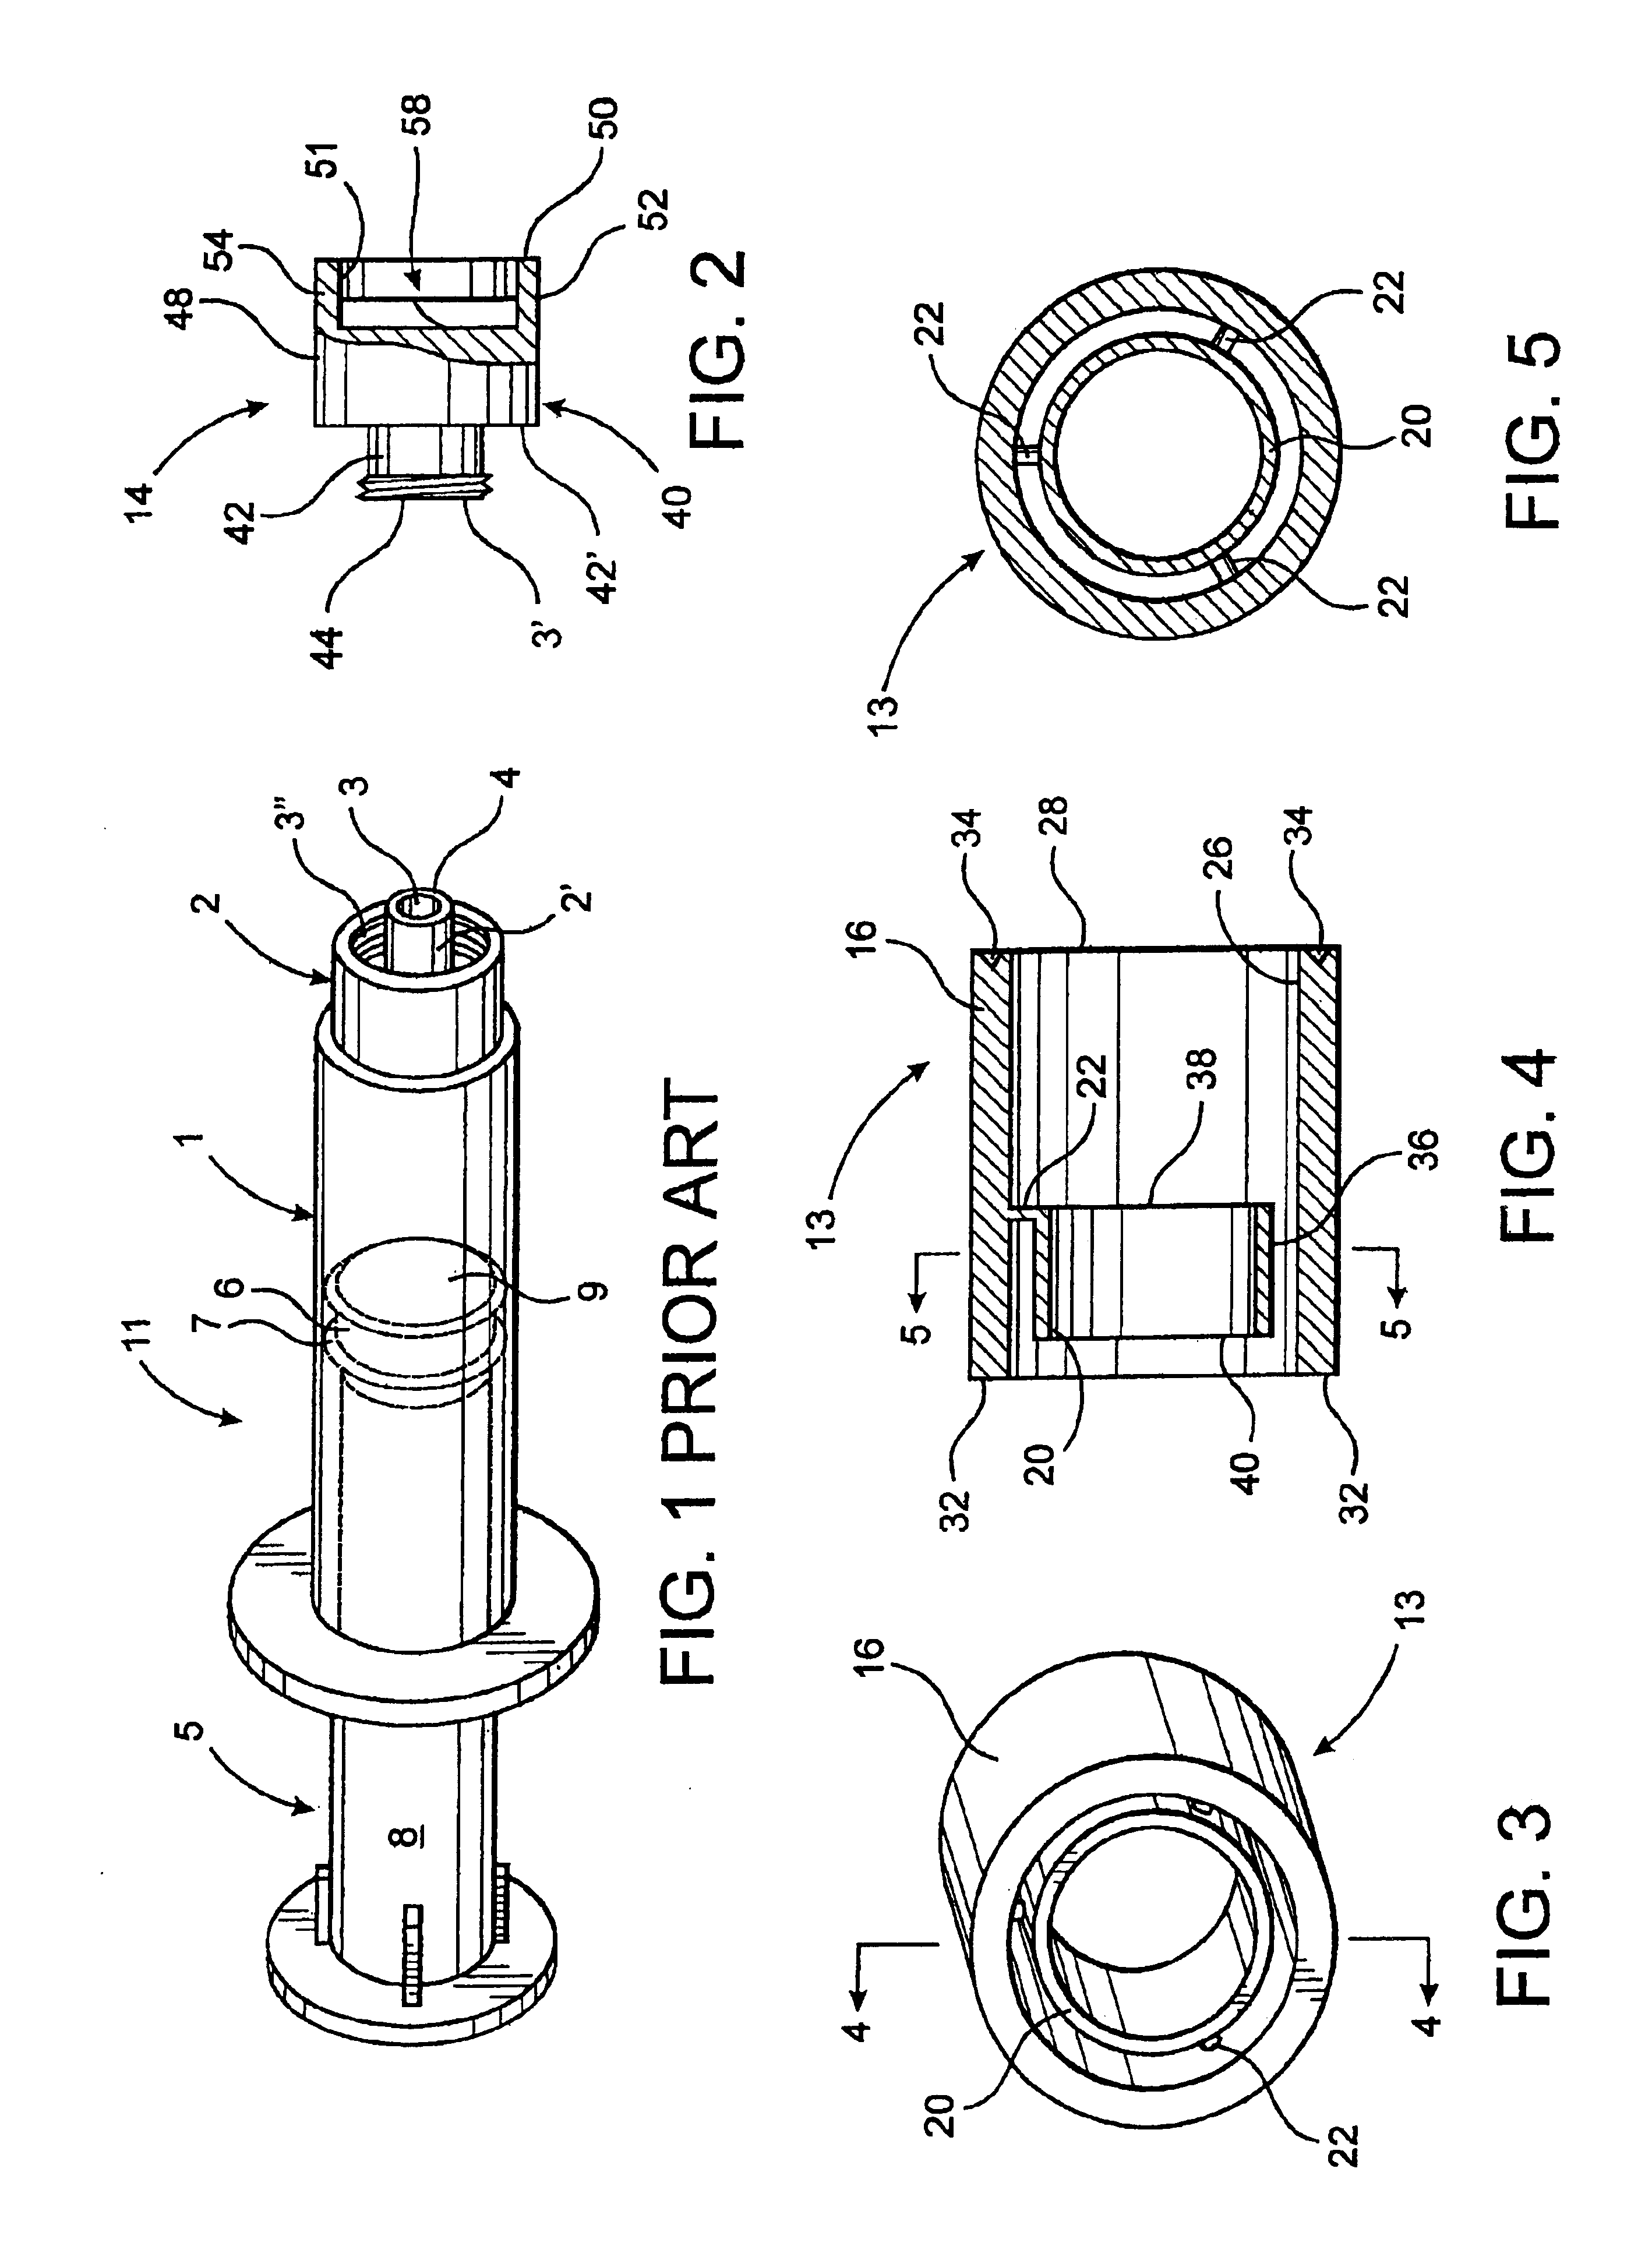 Tamper evident end cap assembly for a loaded syringe and process